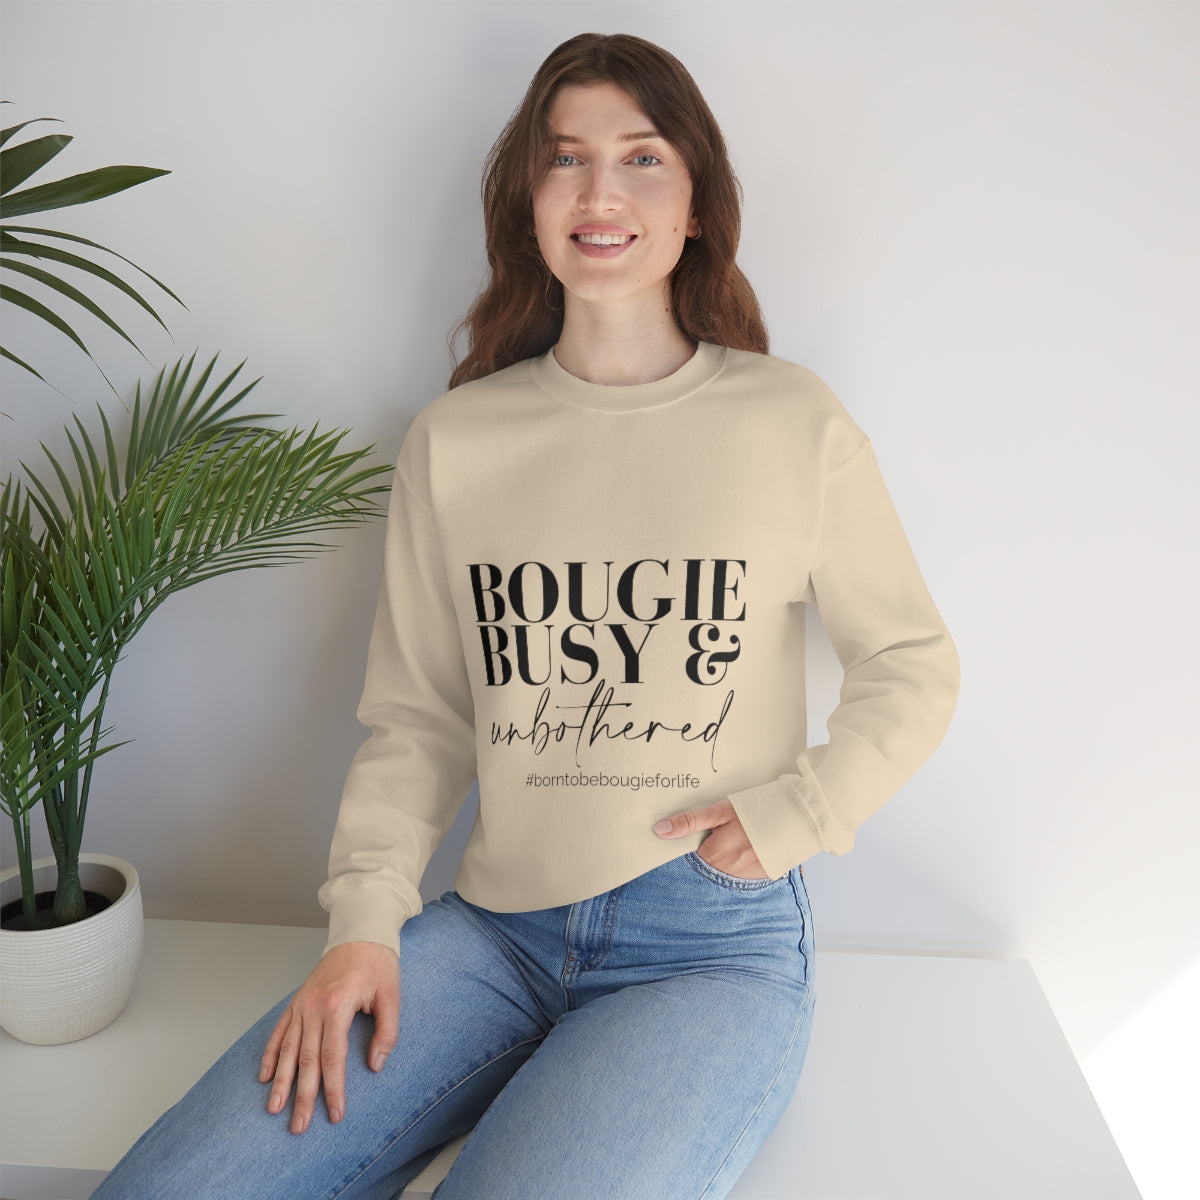 Bougie Busy & Unbothered Sweatshirt